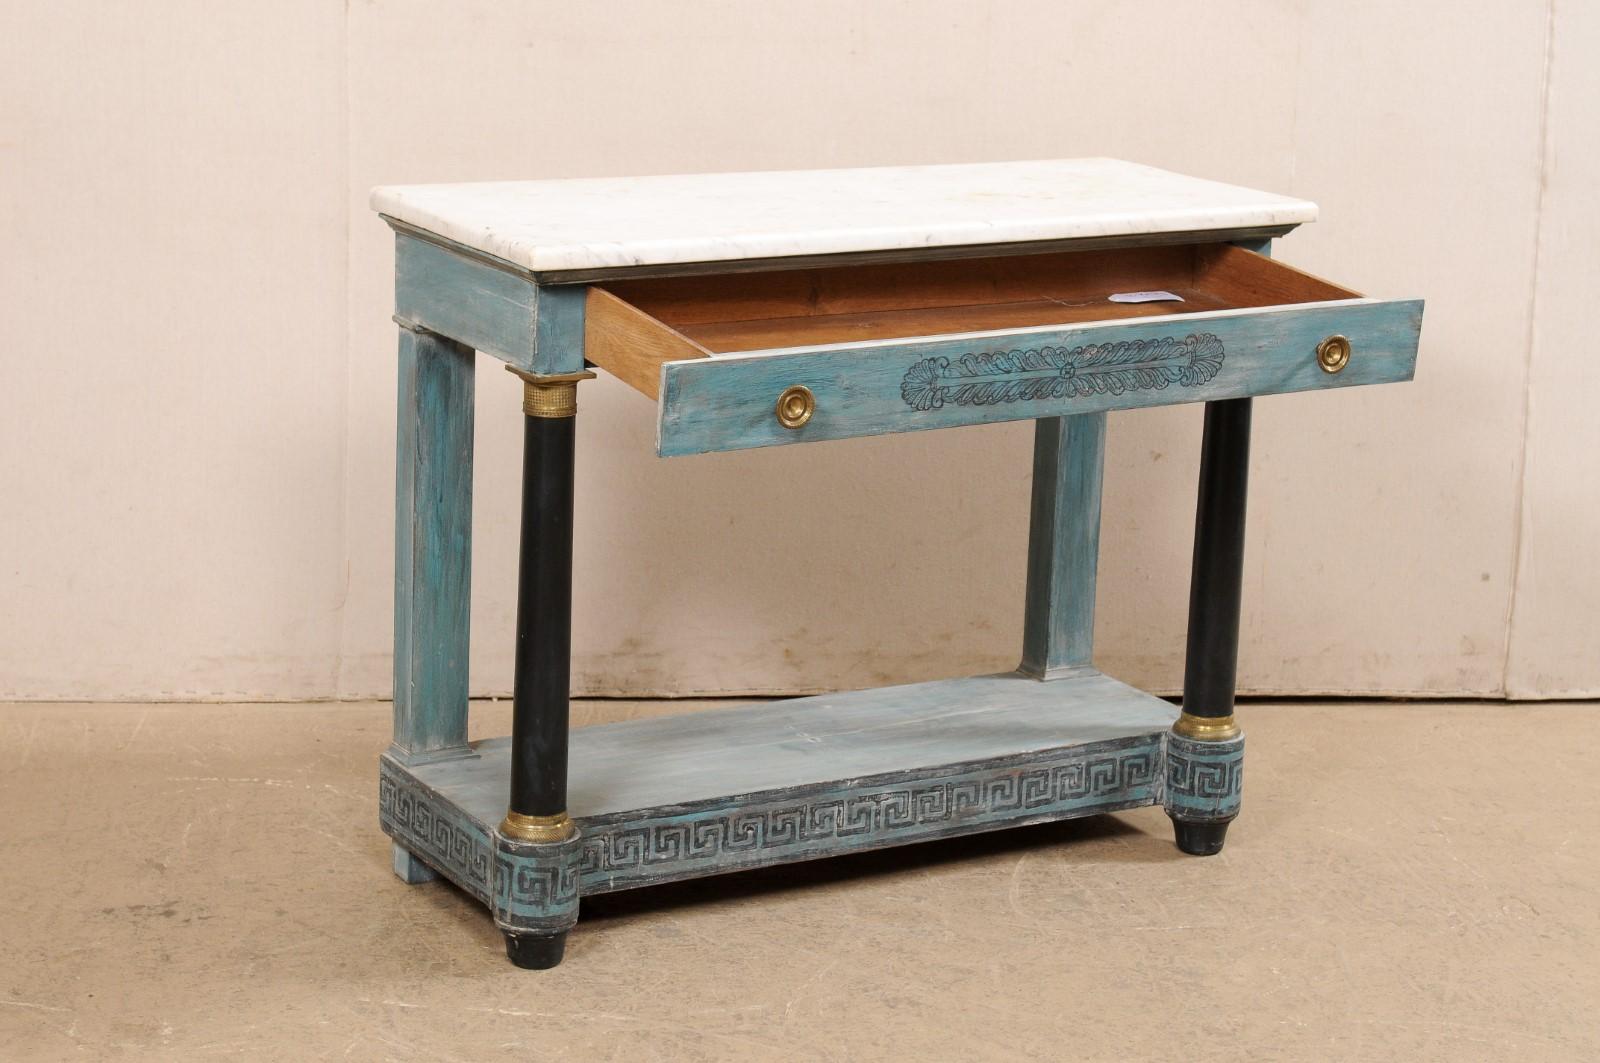 19th Century French Neoclassical Painted Console W/Greek Key Motif, Marble Top, & Long Drawer